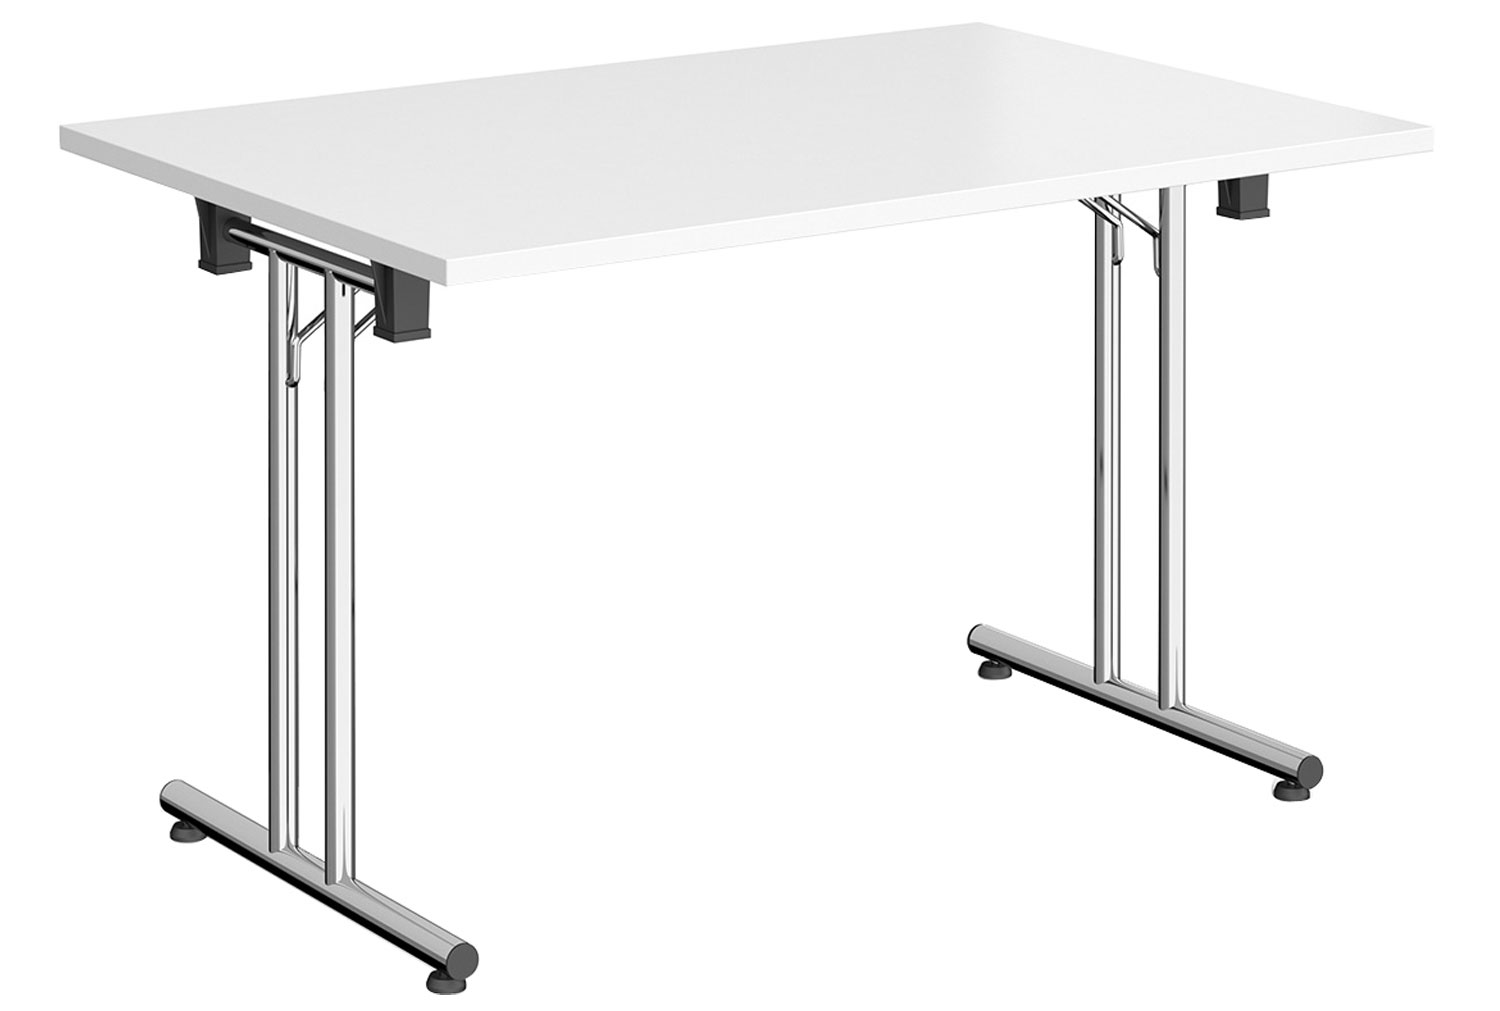 Adson Rectangular Folding Table, 120wx80dx73h (cm), White, Express Delivery